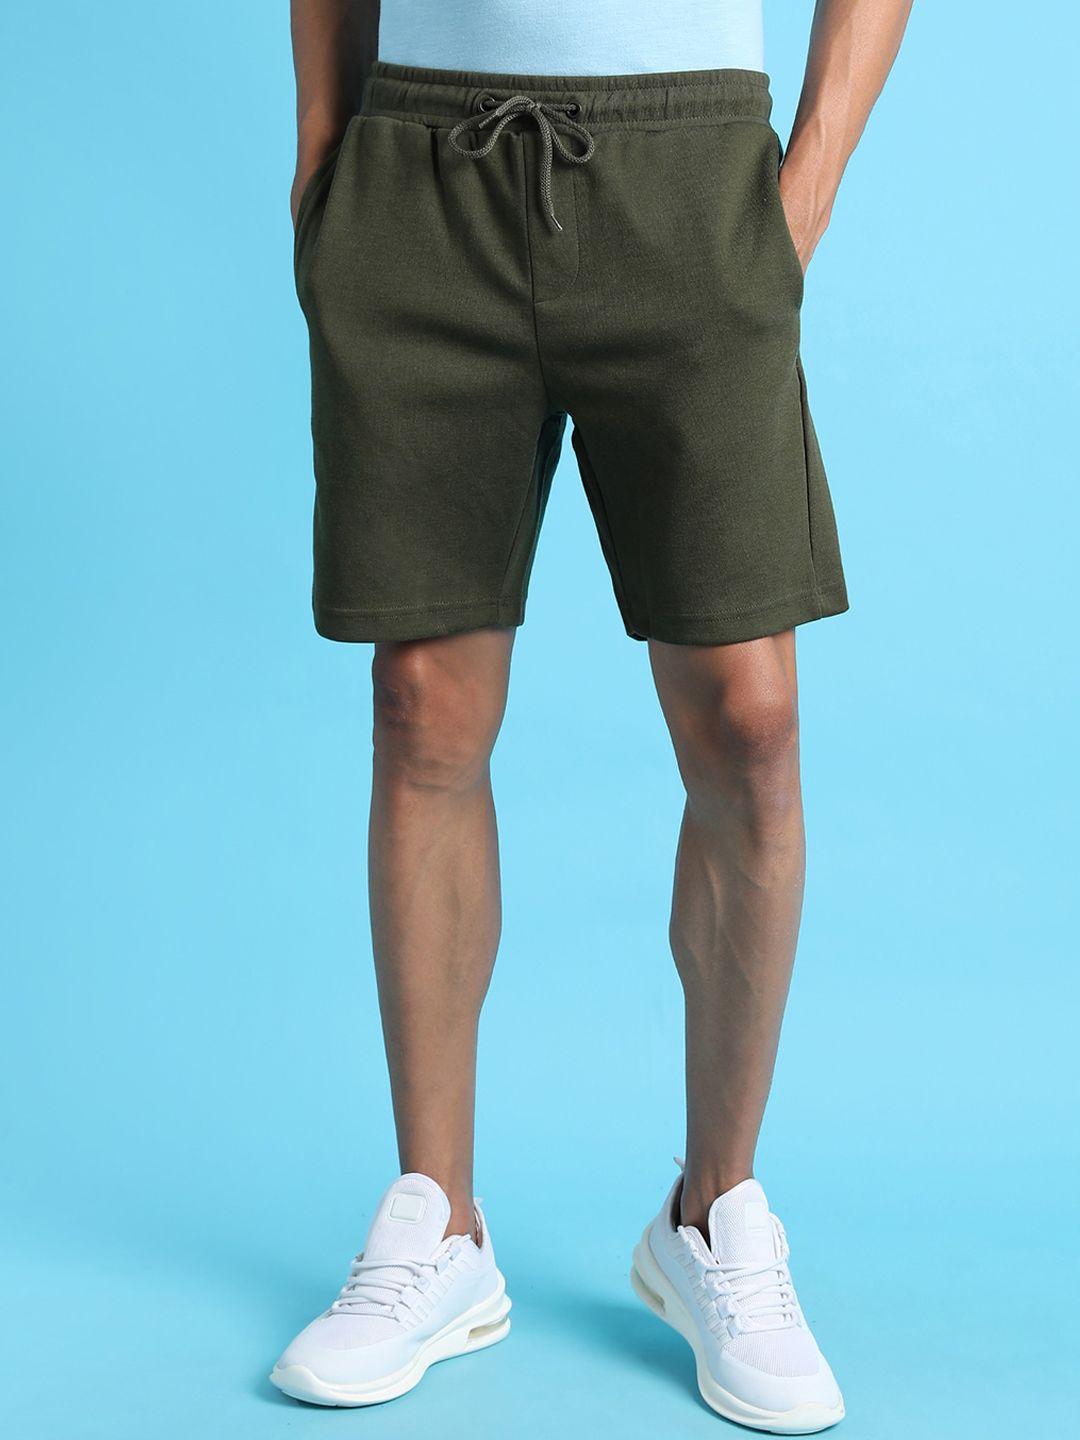 campus sutra men olive green outdoor sports shorts